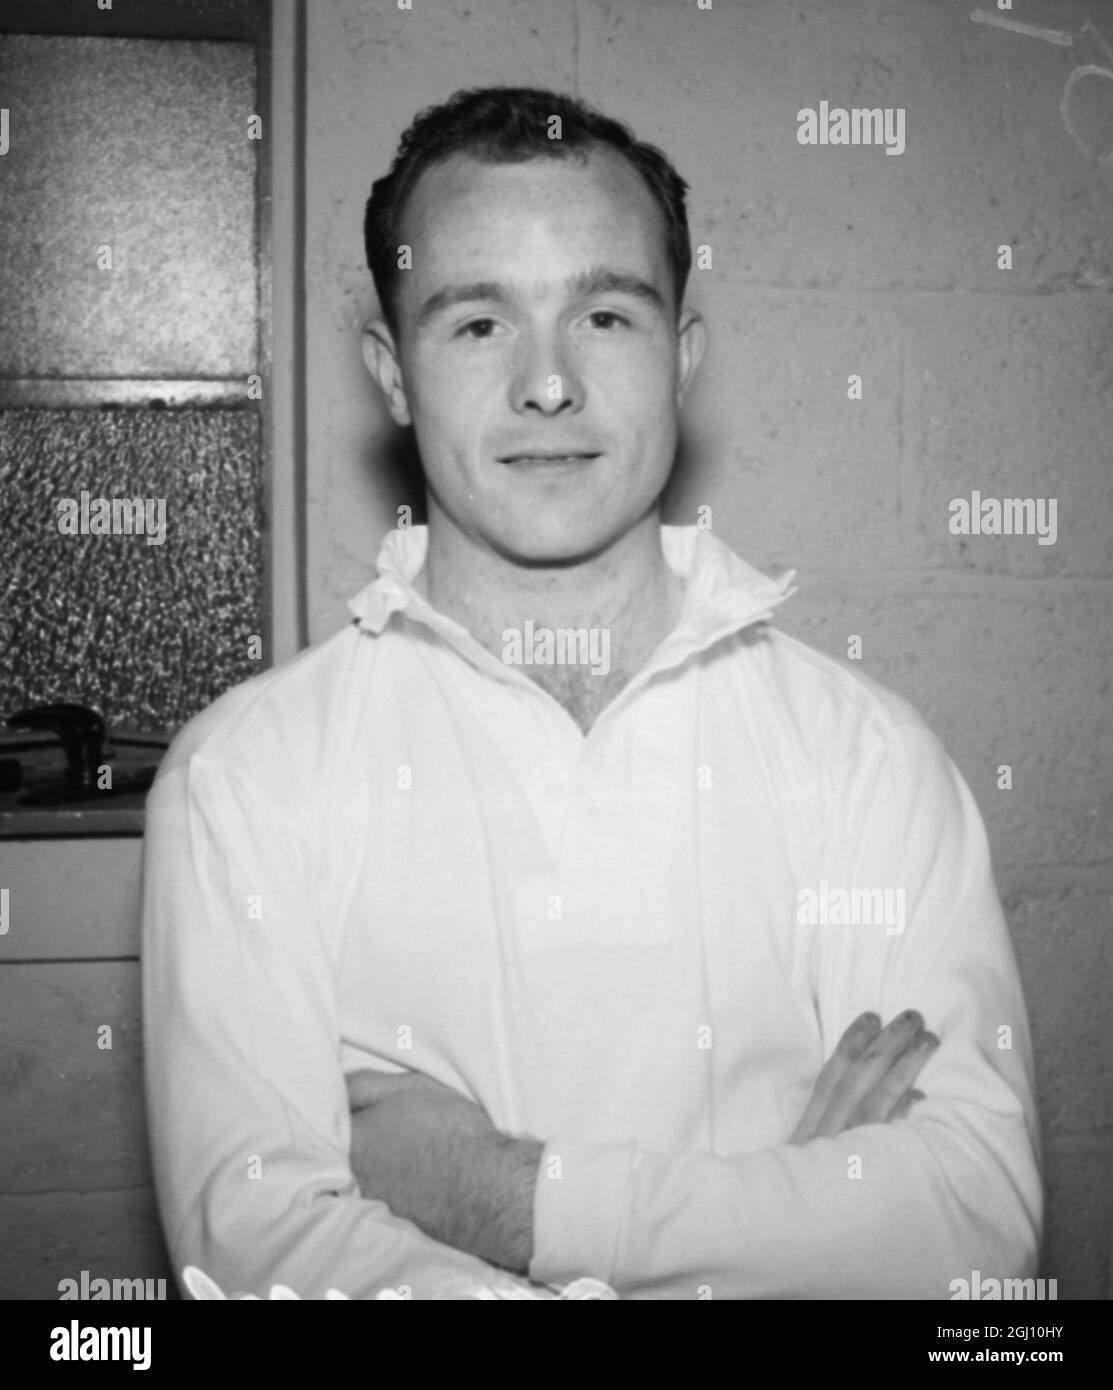 FOOTBALL HUDDERSFIELD TOWN FC PORTRAIT PLAYER - KEVIN MCHALE 24 MARCH 1961 Stock Photo